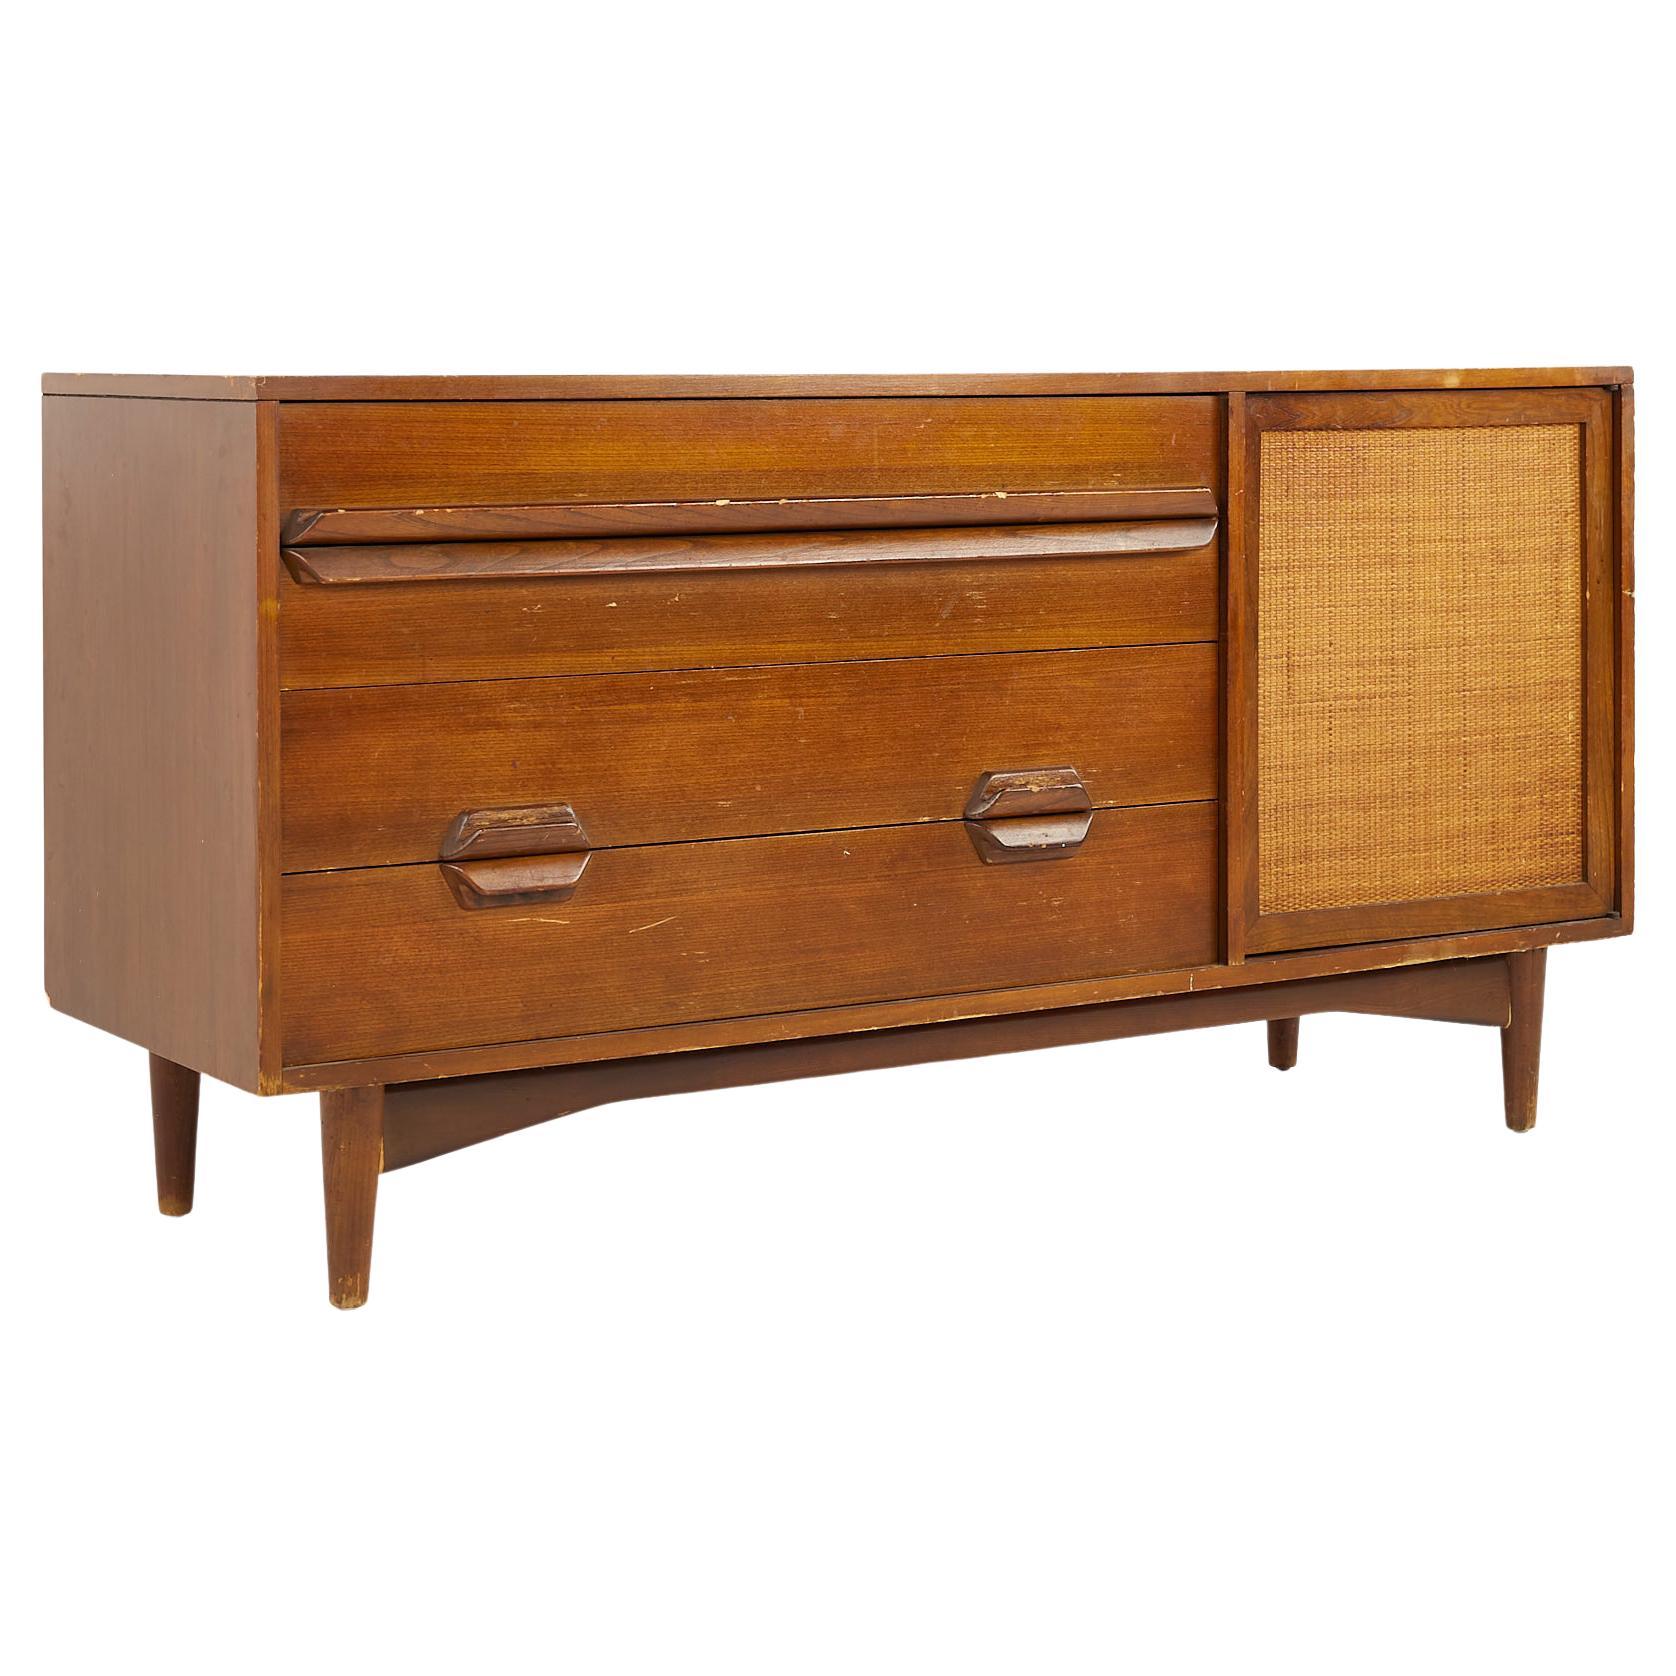 Lawrence Peabody Mid Century Walnut and Cane Sideboard Credenza For Sale